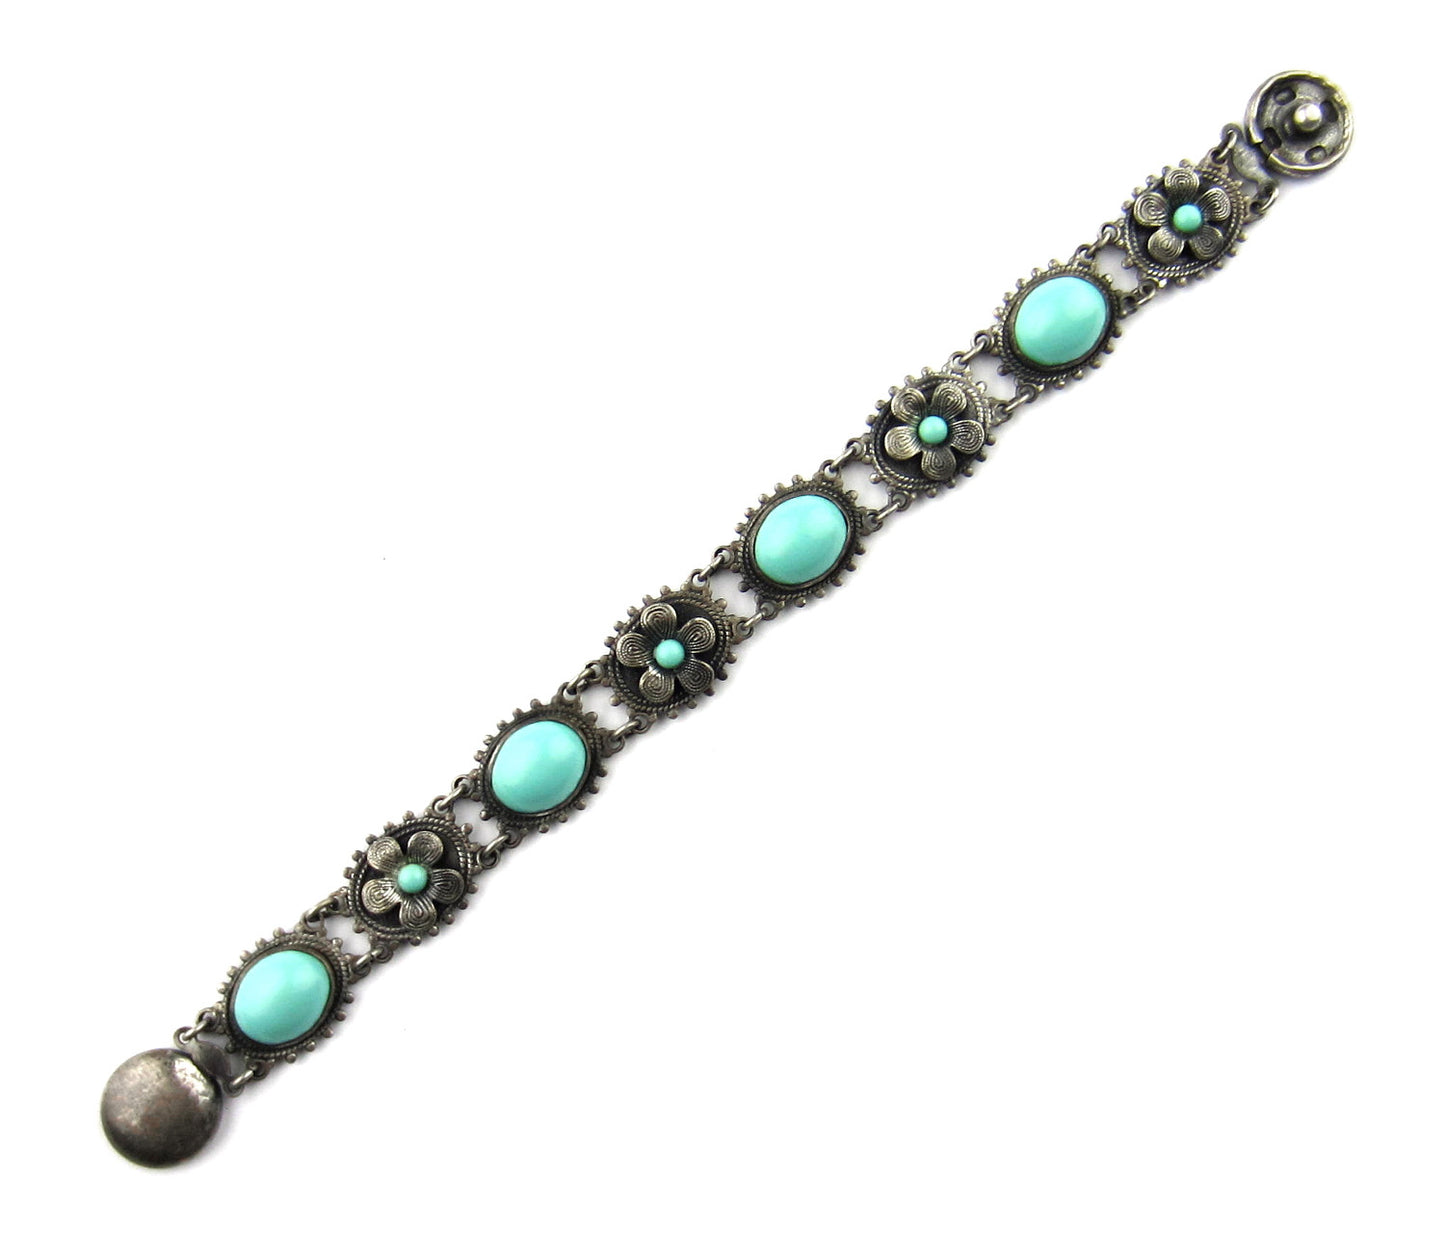 SOLD--Early Art Deco Turquoise Glass Flower Bracelet Silver c. 1920